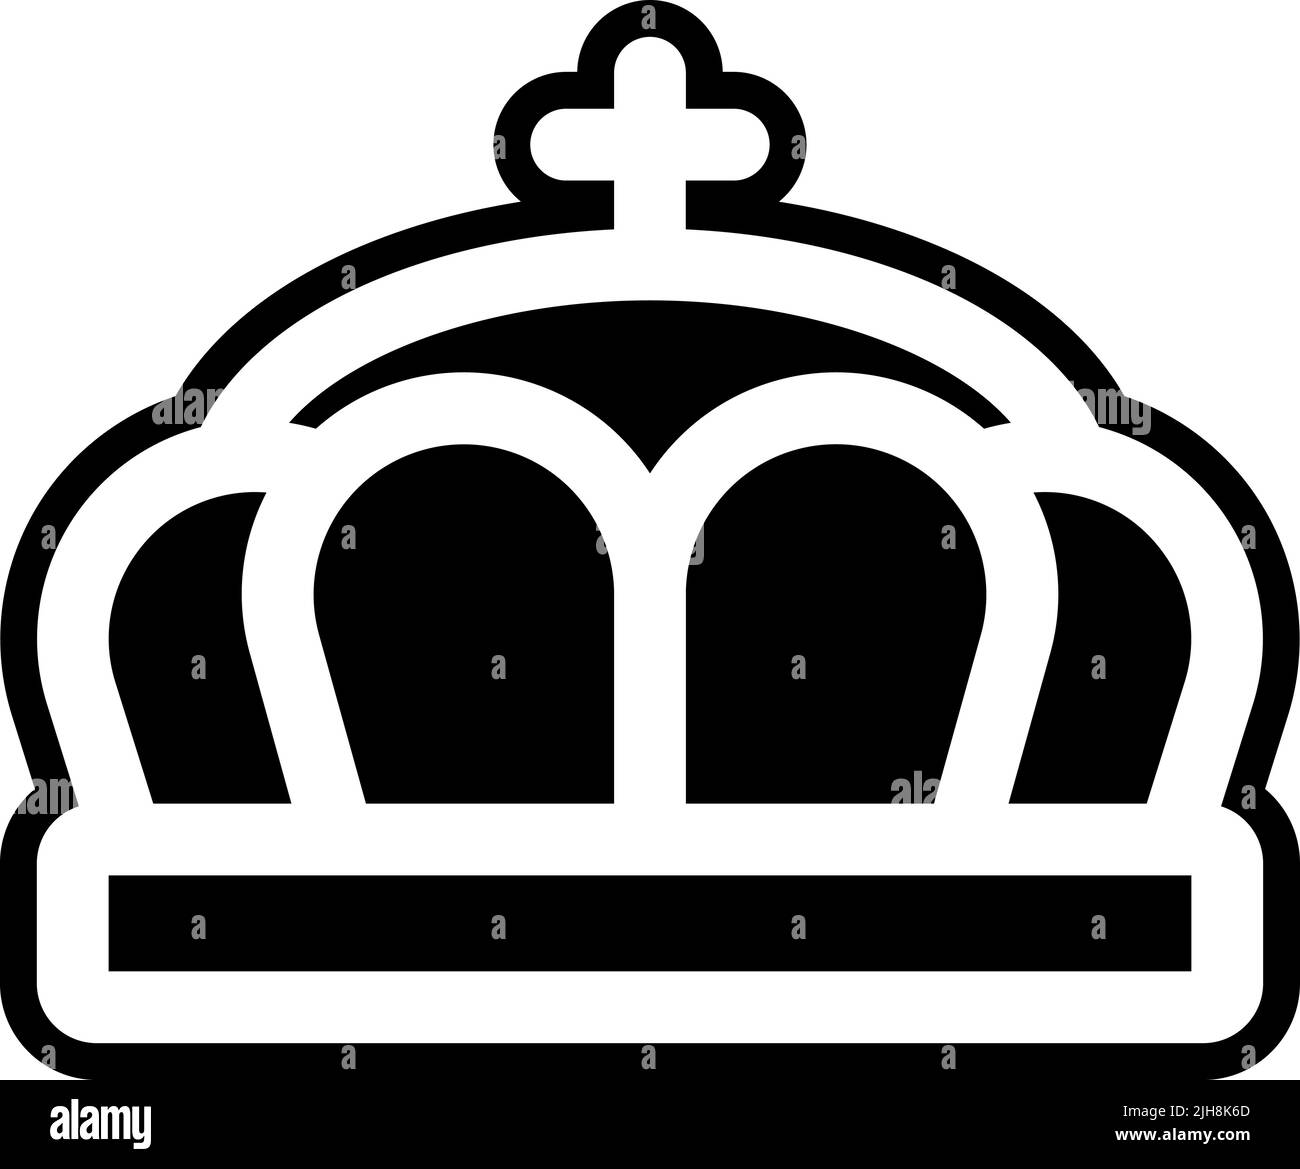 Wealth and luxury crown icon Stock Vector